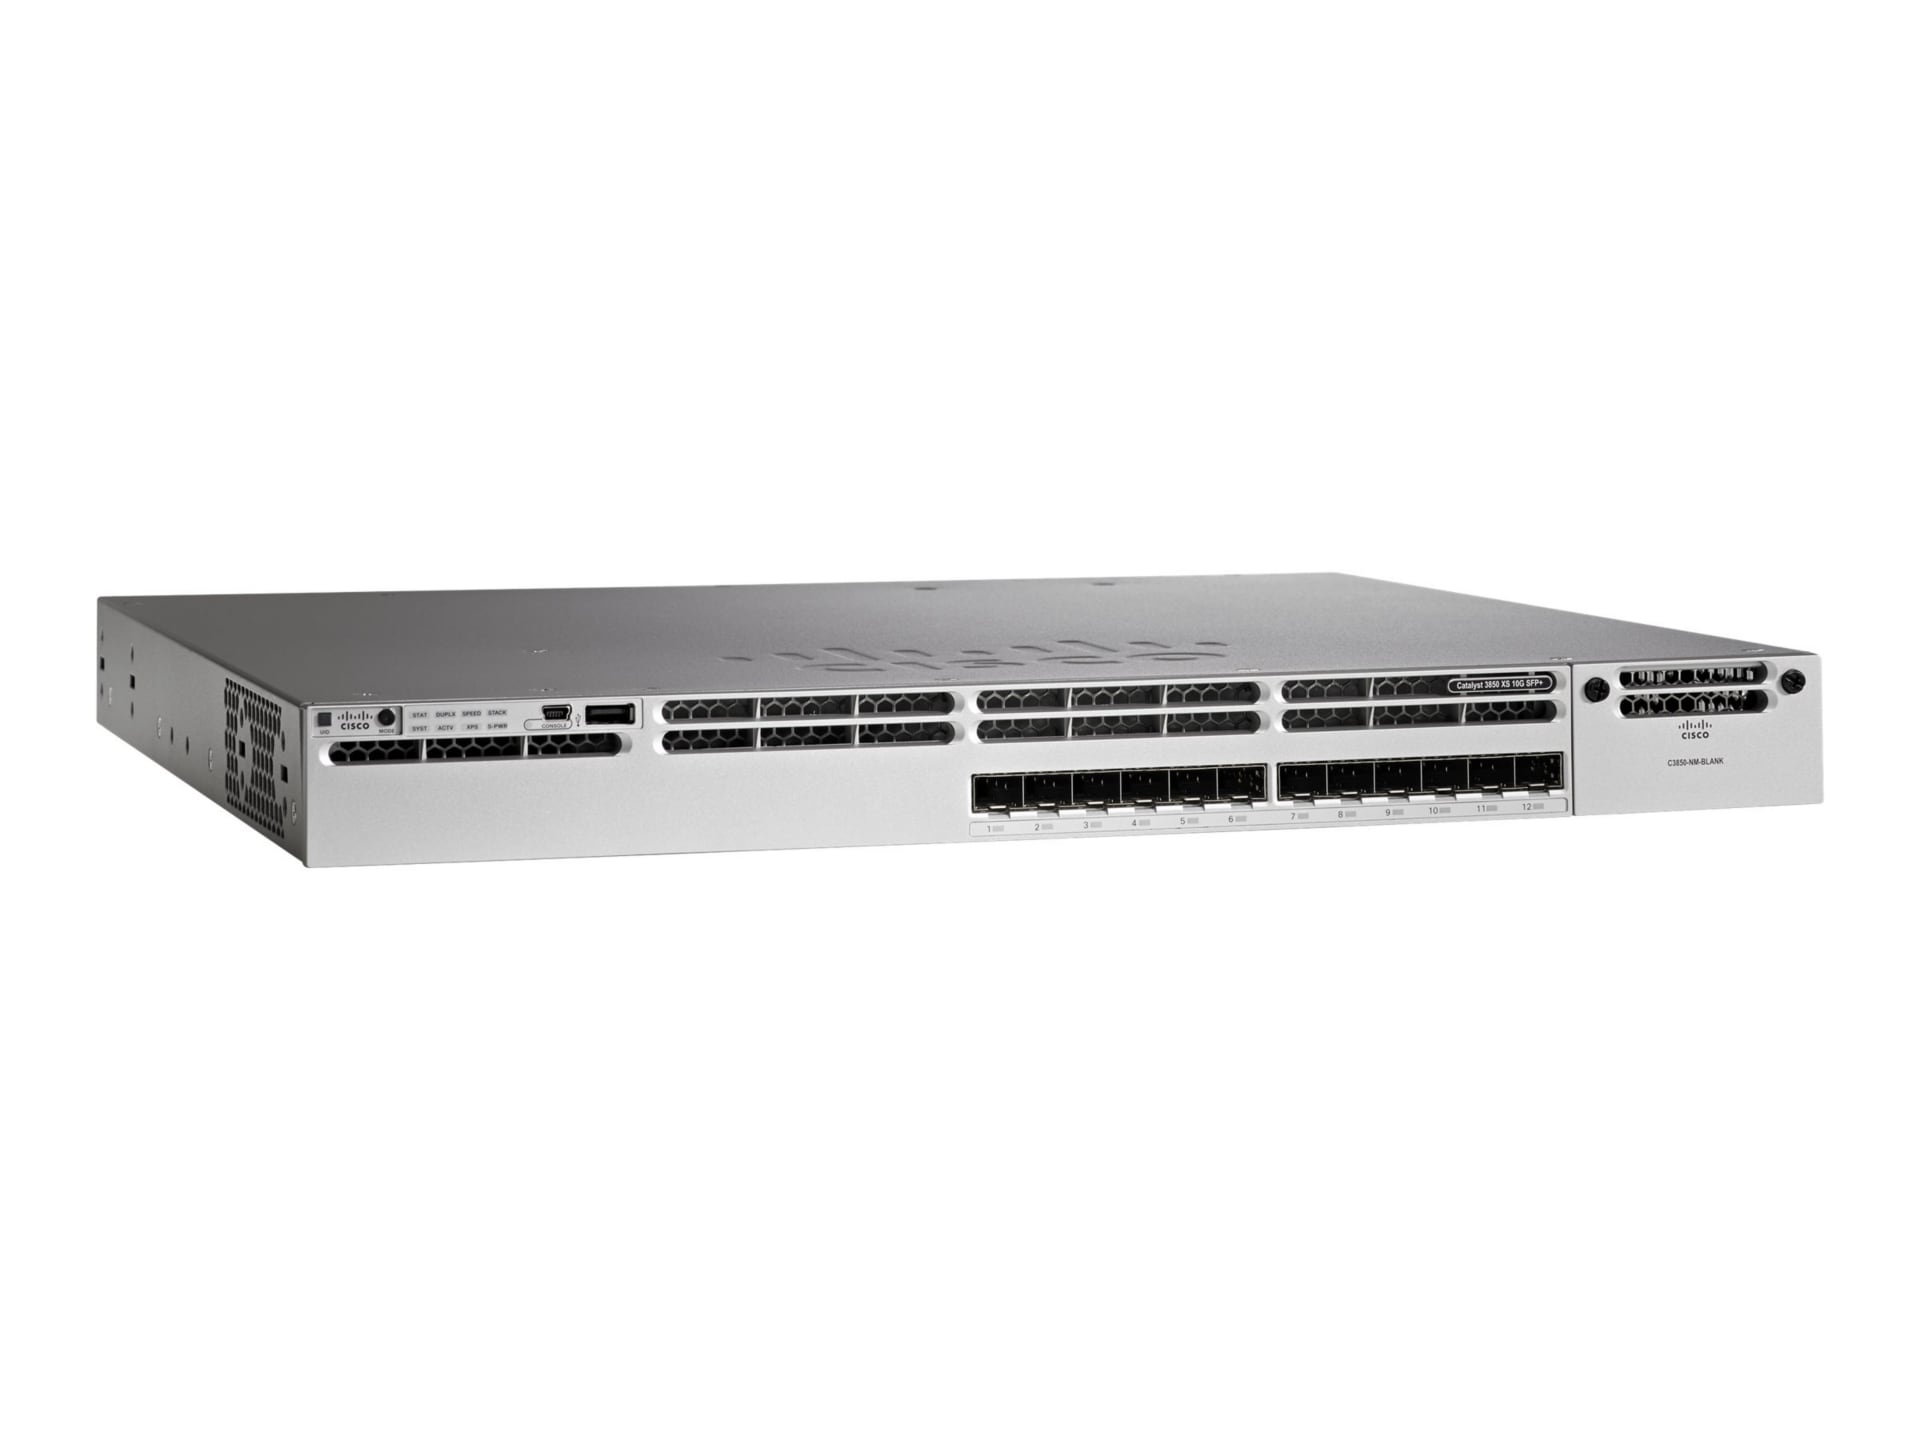 Cisco Catalyst 3850 12 Port SFP+ Ethernet Switch with 350WAC Power Supply - Refurbished